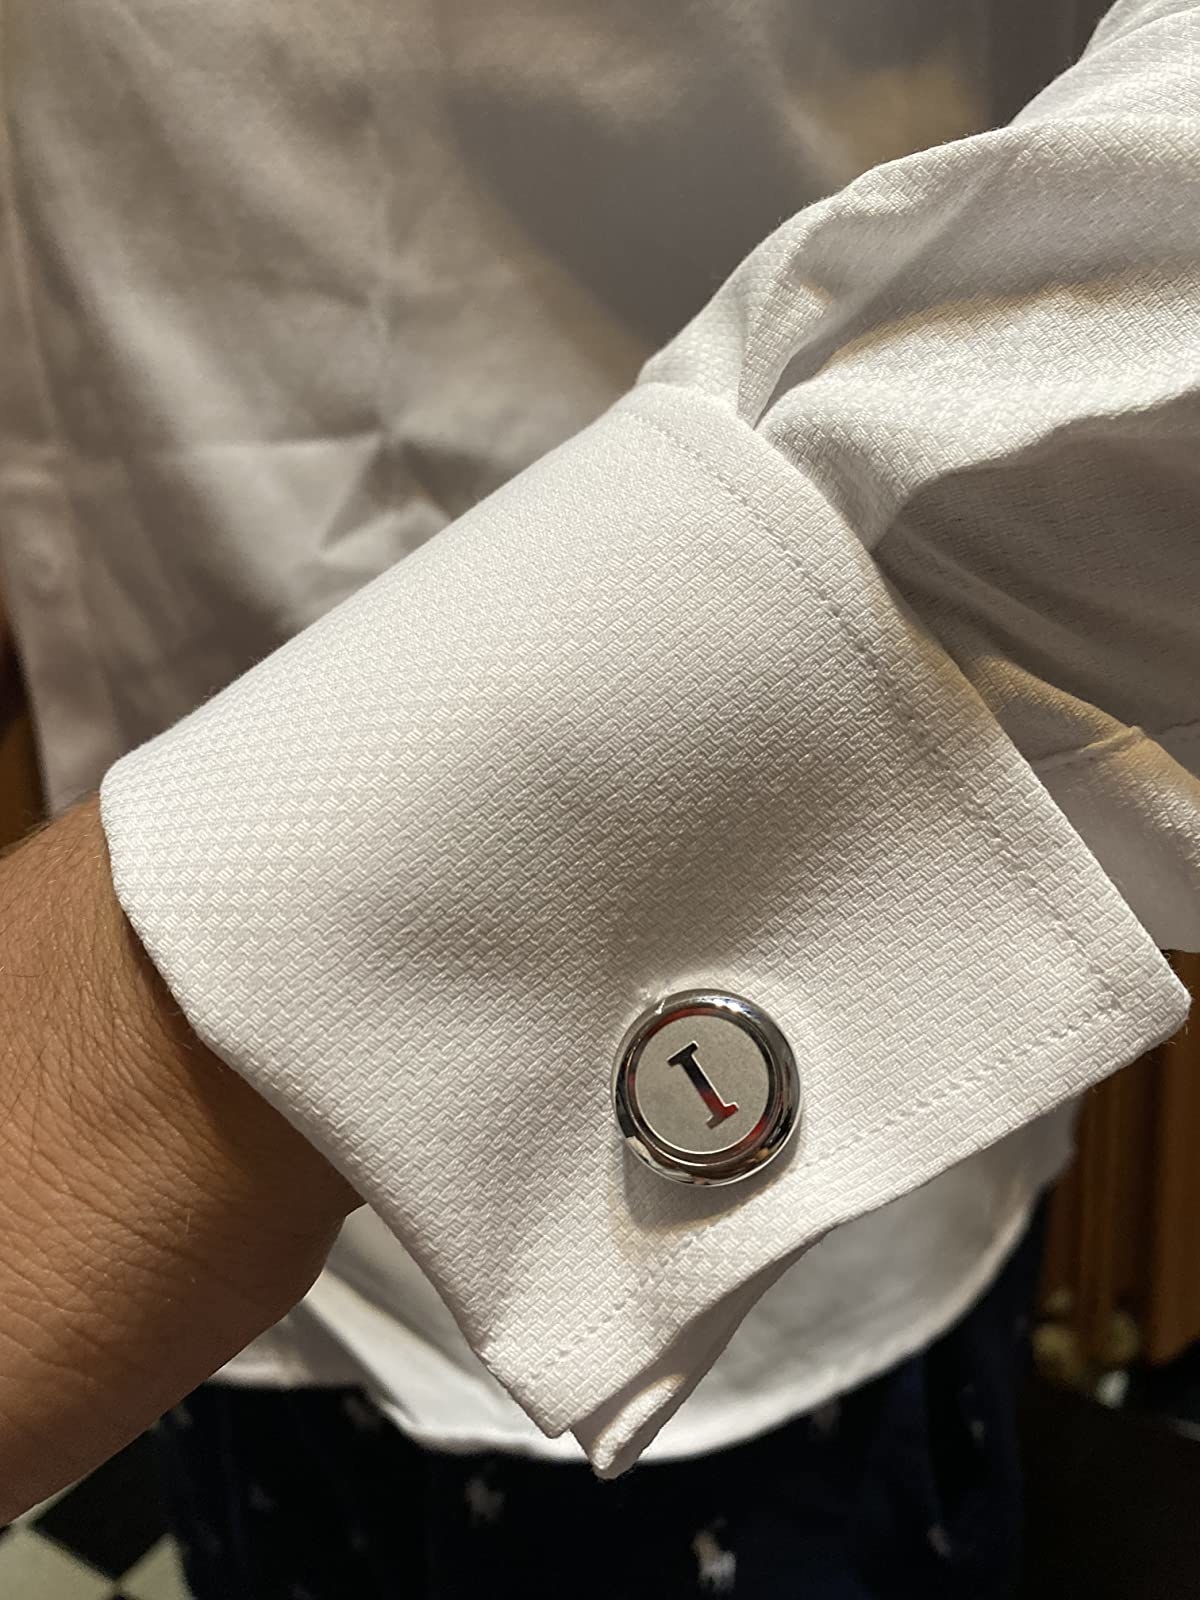 The round silver letter I initial cufflinks on a shirt cuff